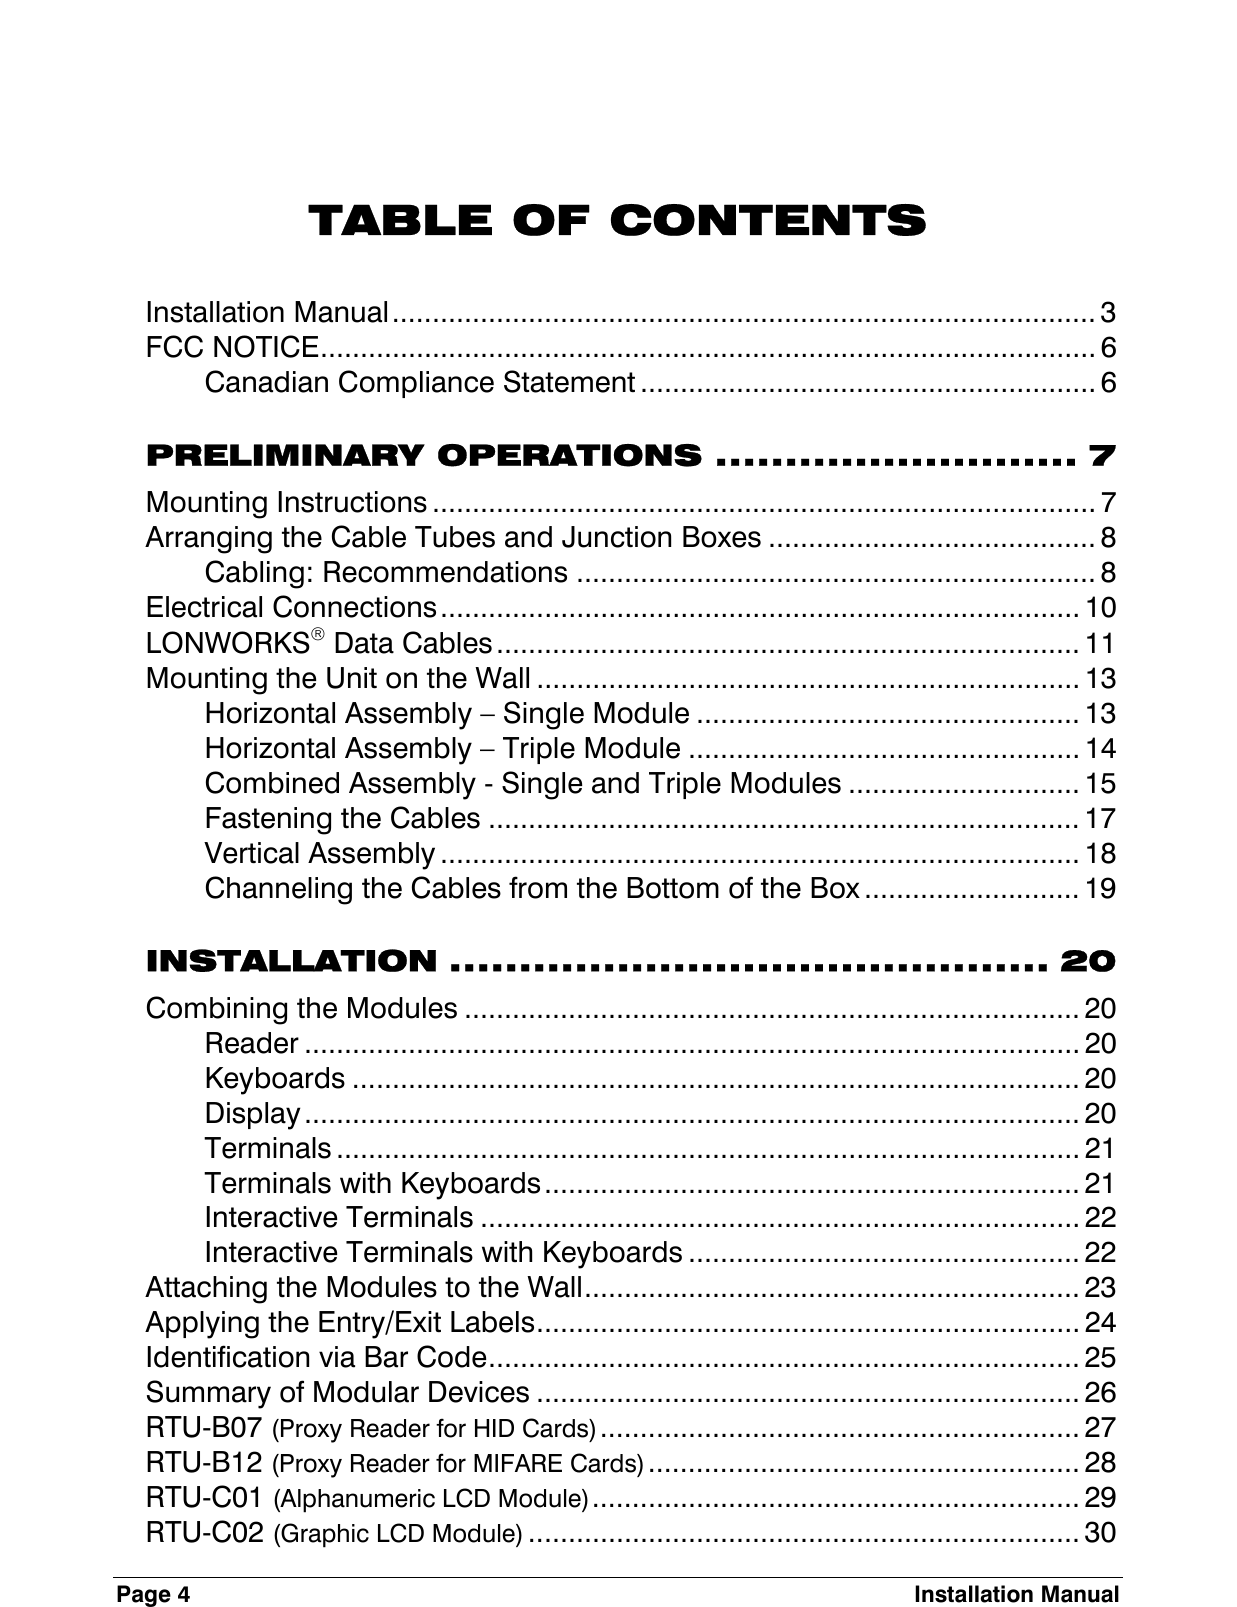 Page 4  Installation Manual   TABLE OF CONTENTS Installation Manual........................................................................................ 3 FCC NOTICE................................................................................................. 6 Canadian Compliance Statement ......................................................... 6 PRELIMINARY OPERATIONS .......................... 7 Mounting Instructions ................................................................................... 7 Arranging the Cable Tubes and Junction Boxes ......................................... 8 Cabling: Recommendations ................................................................. 8 Electrical Connections................................................................................ 10 LONWORKS Data Cables......................................................................... 11 Mounting the Unit on the Wall .................................................................... 13 Horizontal Assembly – Single Module ................................................ 13 Horizontal Assembly – Triple Module ................................................. 14 Combined Assembly - Single and Triple Modules ............................. 15 Fastening the Cables .......................................................................... 17 Vertical Assembly ................................................................................ 18 Channeling the Cables from the Bottom of the Box ........................... 19 INSTALLATION ........................................... 20 Combining the Modules ............................................................................. 20 Reader ................................................................................................. 20 Keyboards ........................................................................................... 20 Display................................................................................................. 20 Terminals ............................................................................................. 21 Terminals with Keyboards................................................................... 21 Interactive Terminals ........................................................................... 22 Interactive Terminals with Keyboards ................................................. 22 Attaching the Modules to the Wall.............................................................. 23 Applying the Entry/Exit Labels.................................................................... 24 Identification via Bar Code.......................................................................... 25 Summary of Modular Devices .................................................................... 26 RTU-B07 (Proxy Reader for HID Cards)............................................................ 27 RTU-B12 (Proxy Reader for MIFARE Cards)...................................................... 28 RTU-C01 (Alphanumeric LCD Module)............................................................. 29 RTU-C02 (Graphic LCD Module) ..................................................................... 30 